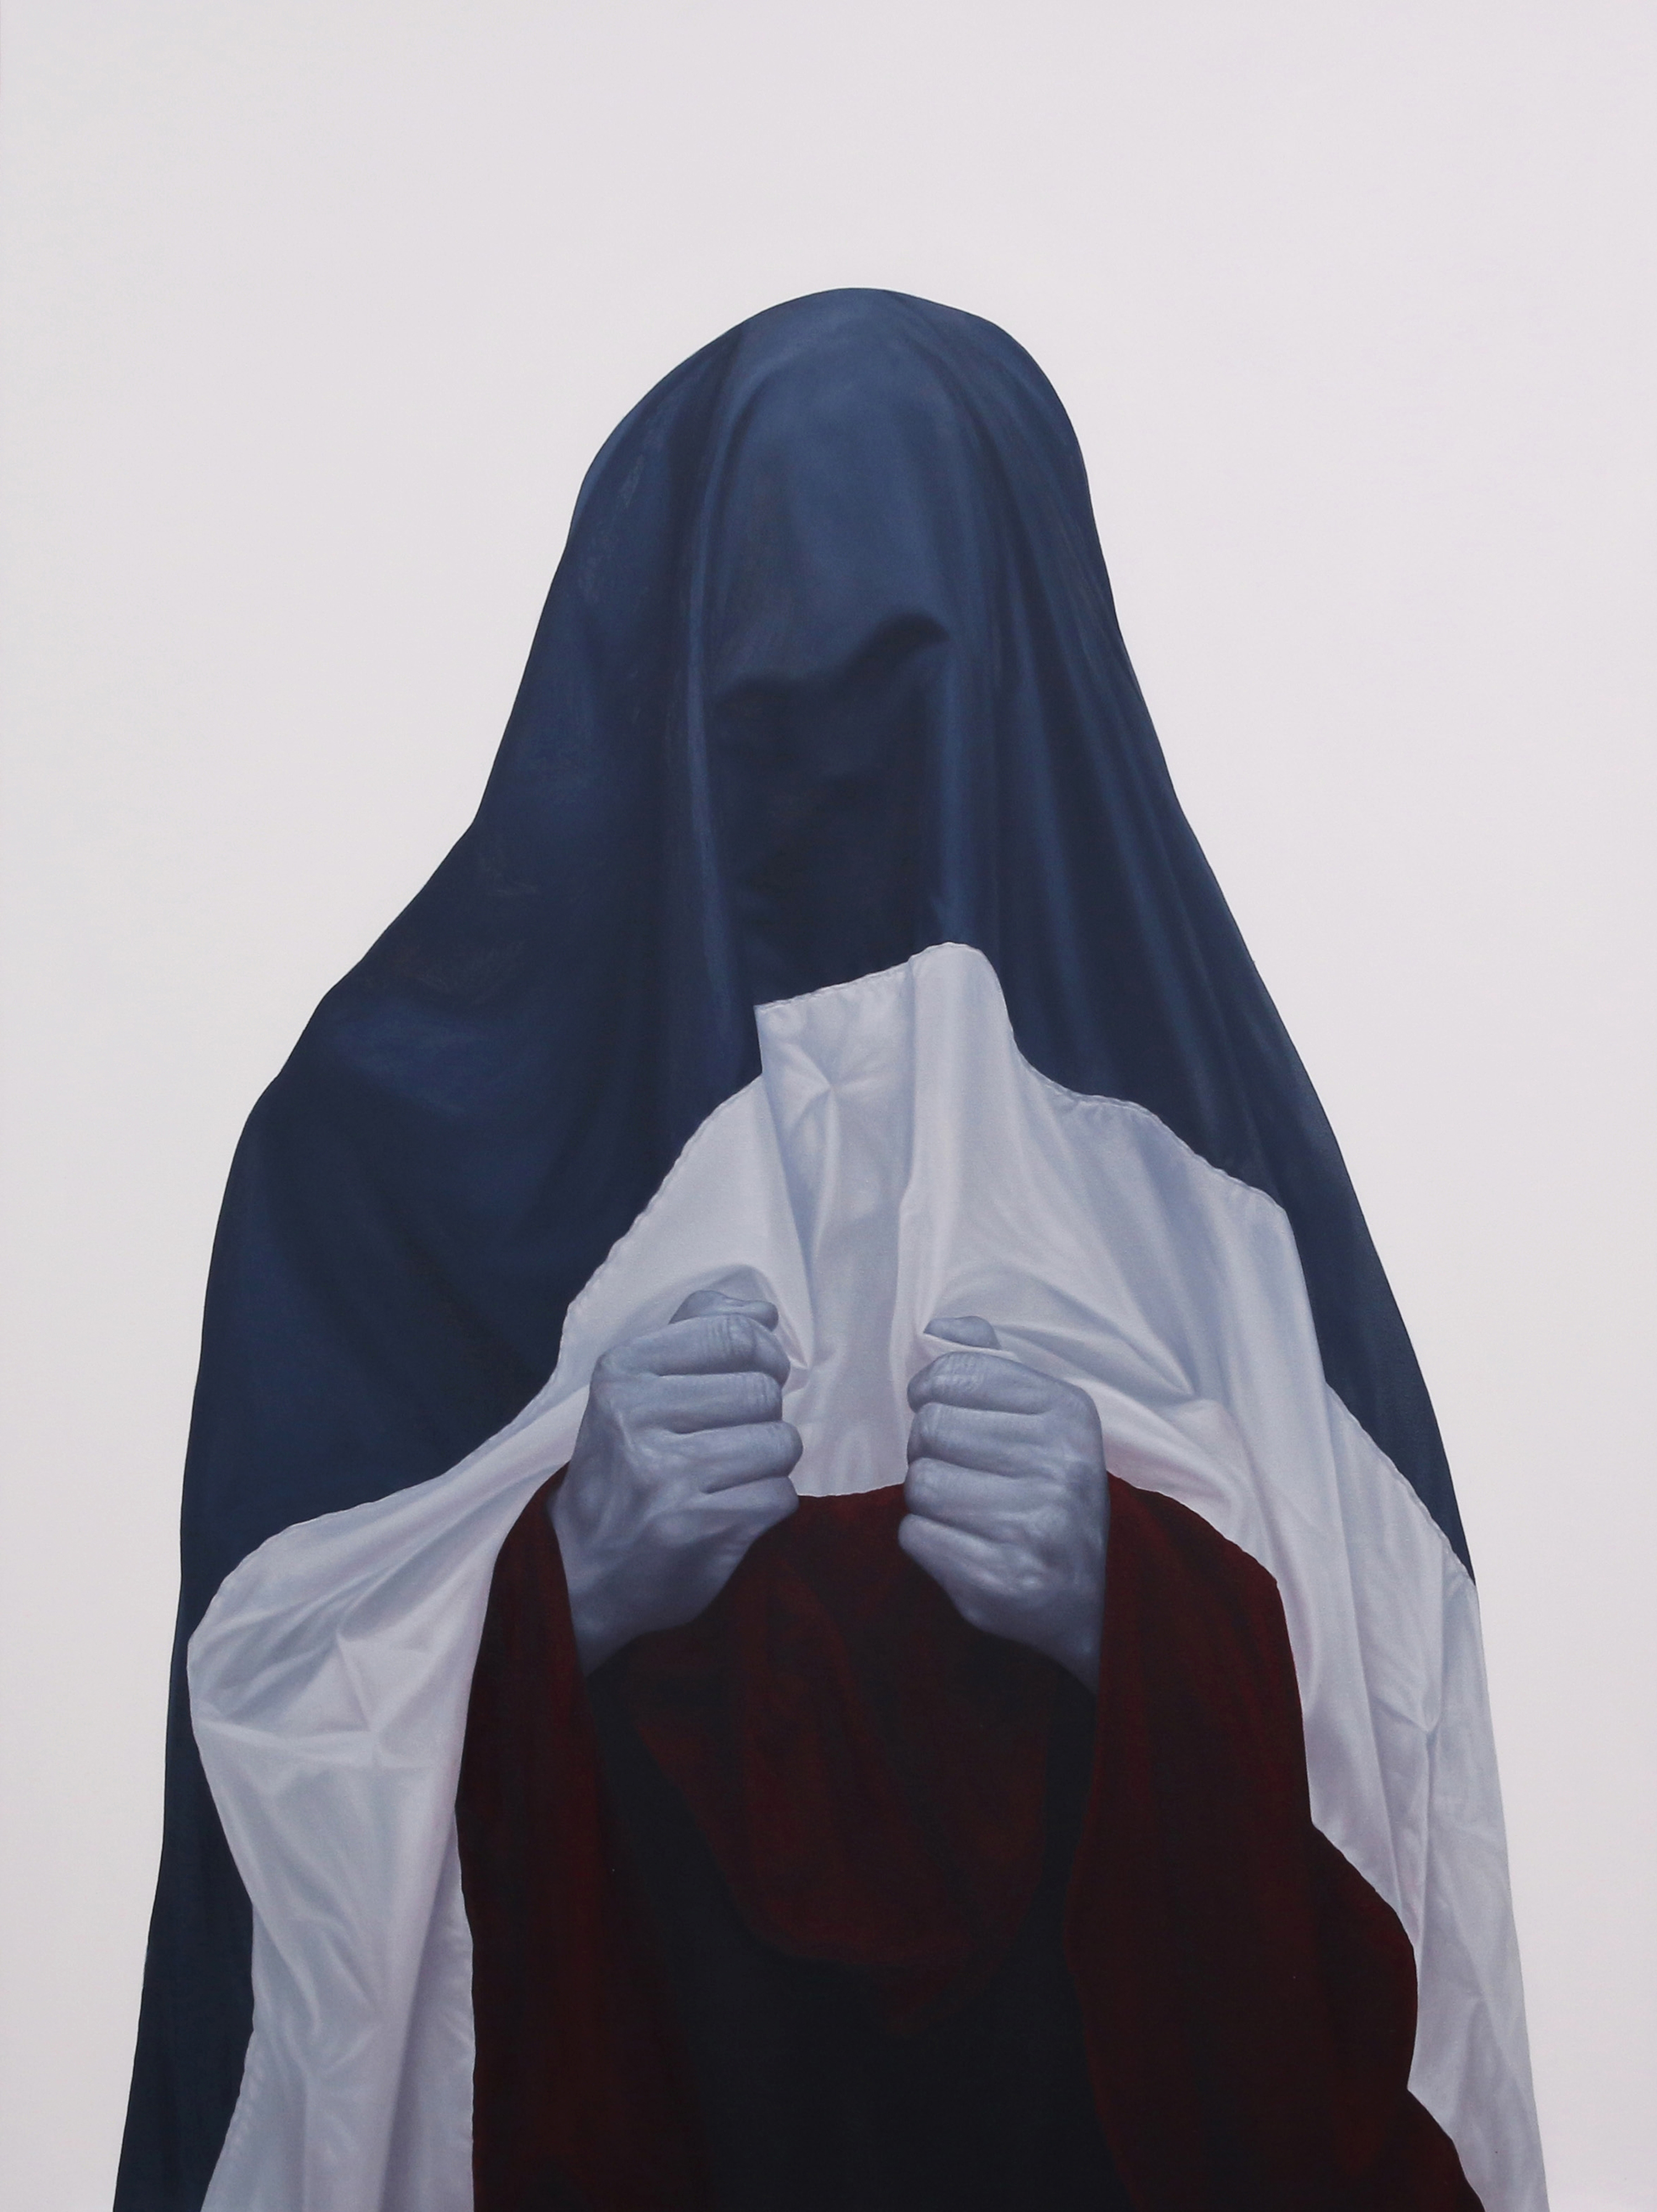 The Under of Rights.(2015) Oil on canvas, 240x160cm.